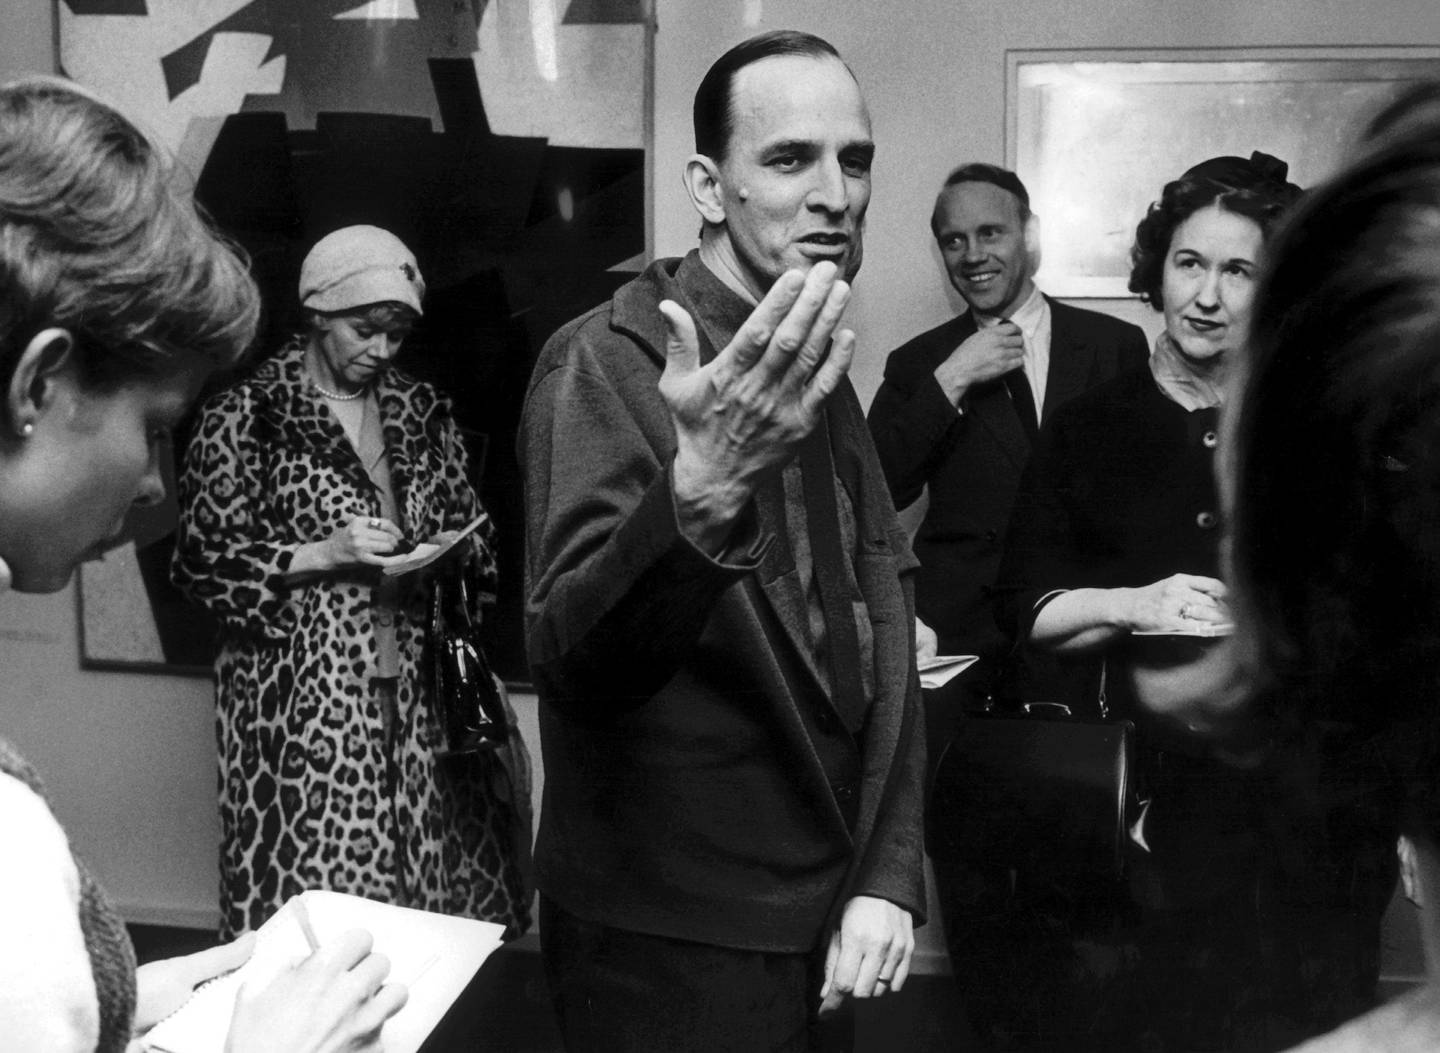 (FILES) This file photo taken on December 6, 1963 shows Swedish director Ingmar Bergman (C) showing to journalists new art works at The Royal Dramatic Theatre, Swedens National Theatre commonly known as Dramaten, in Stockholm.

Swedish film legend Ingmar Bergman, whose tales of anguished love and loneliness made him one of the 20th century's leading directors, is back in the spotlight with a series of events to mark the centenary of his birth. Bergman, who died in 2007 at the age of 89, would have turned 100 on July 14, 2018. / AFP PHOTO / TT NEWS AGENCY / -